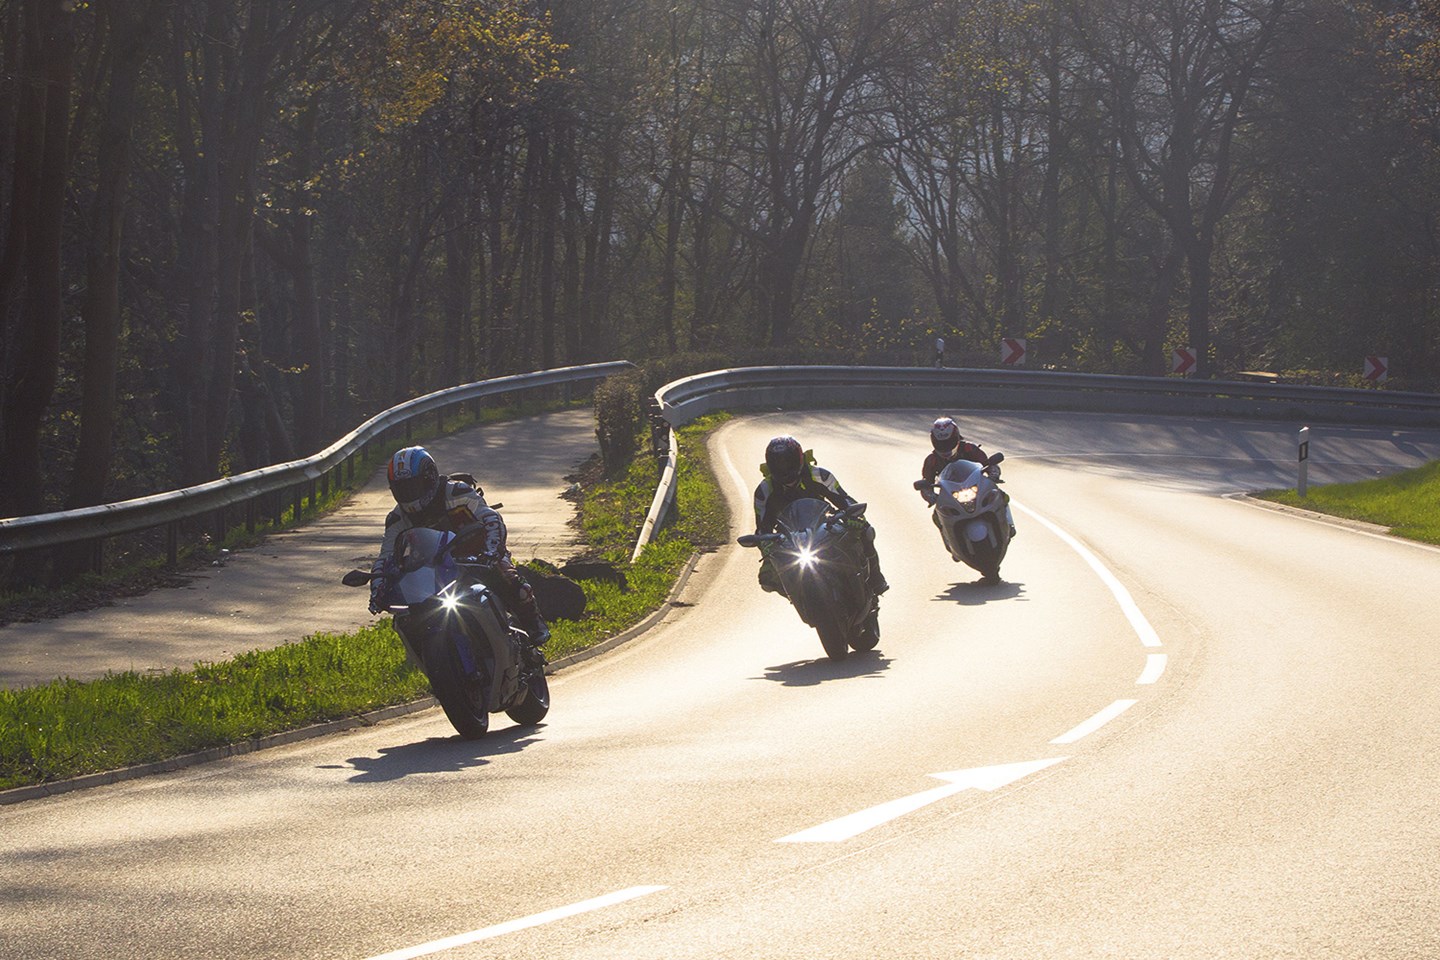 ramme Shredded udsultet Experience riding as fast as you want on a German autobahn | MCN